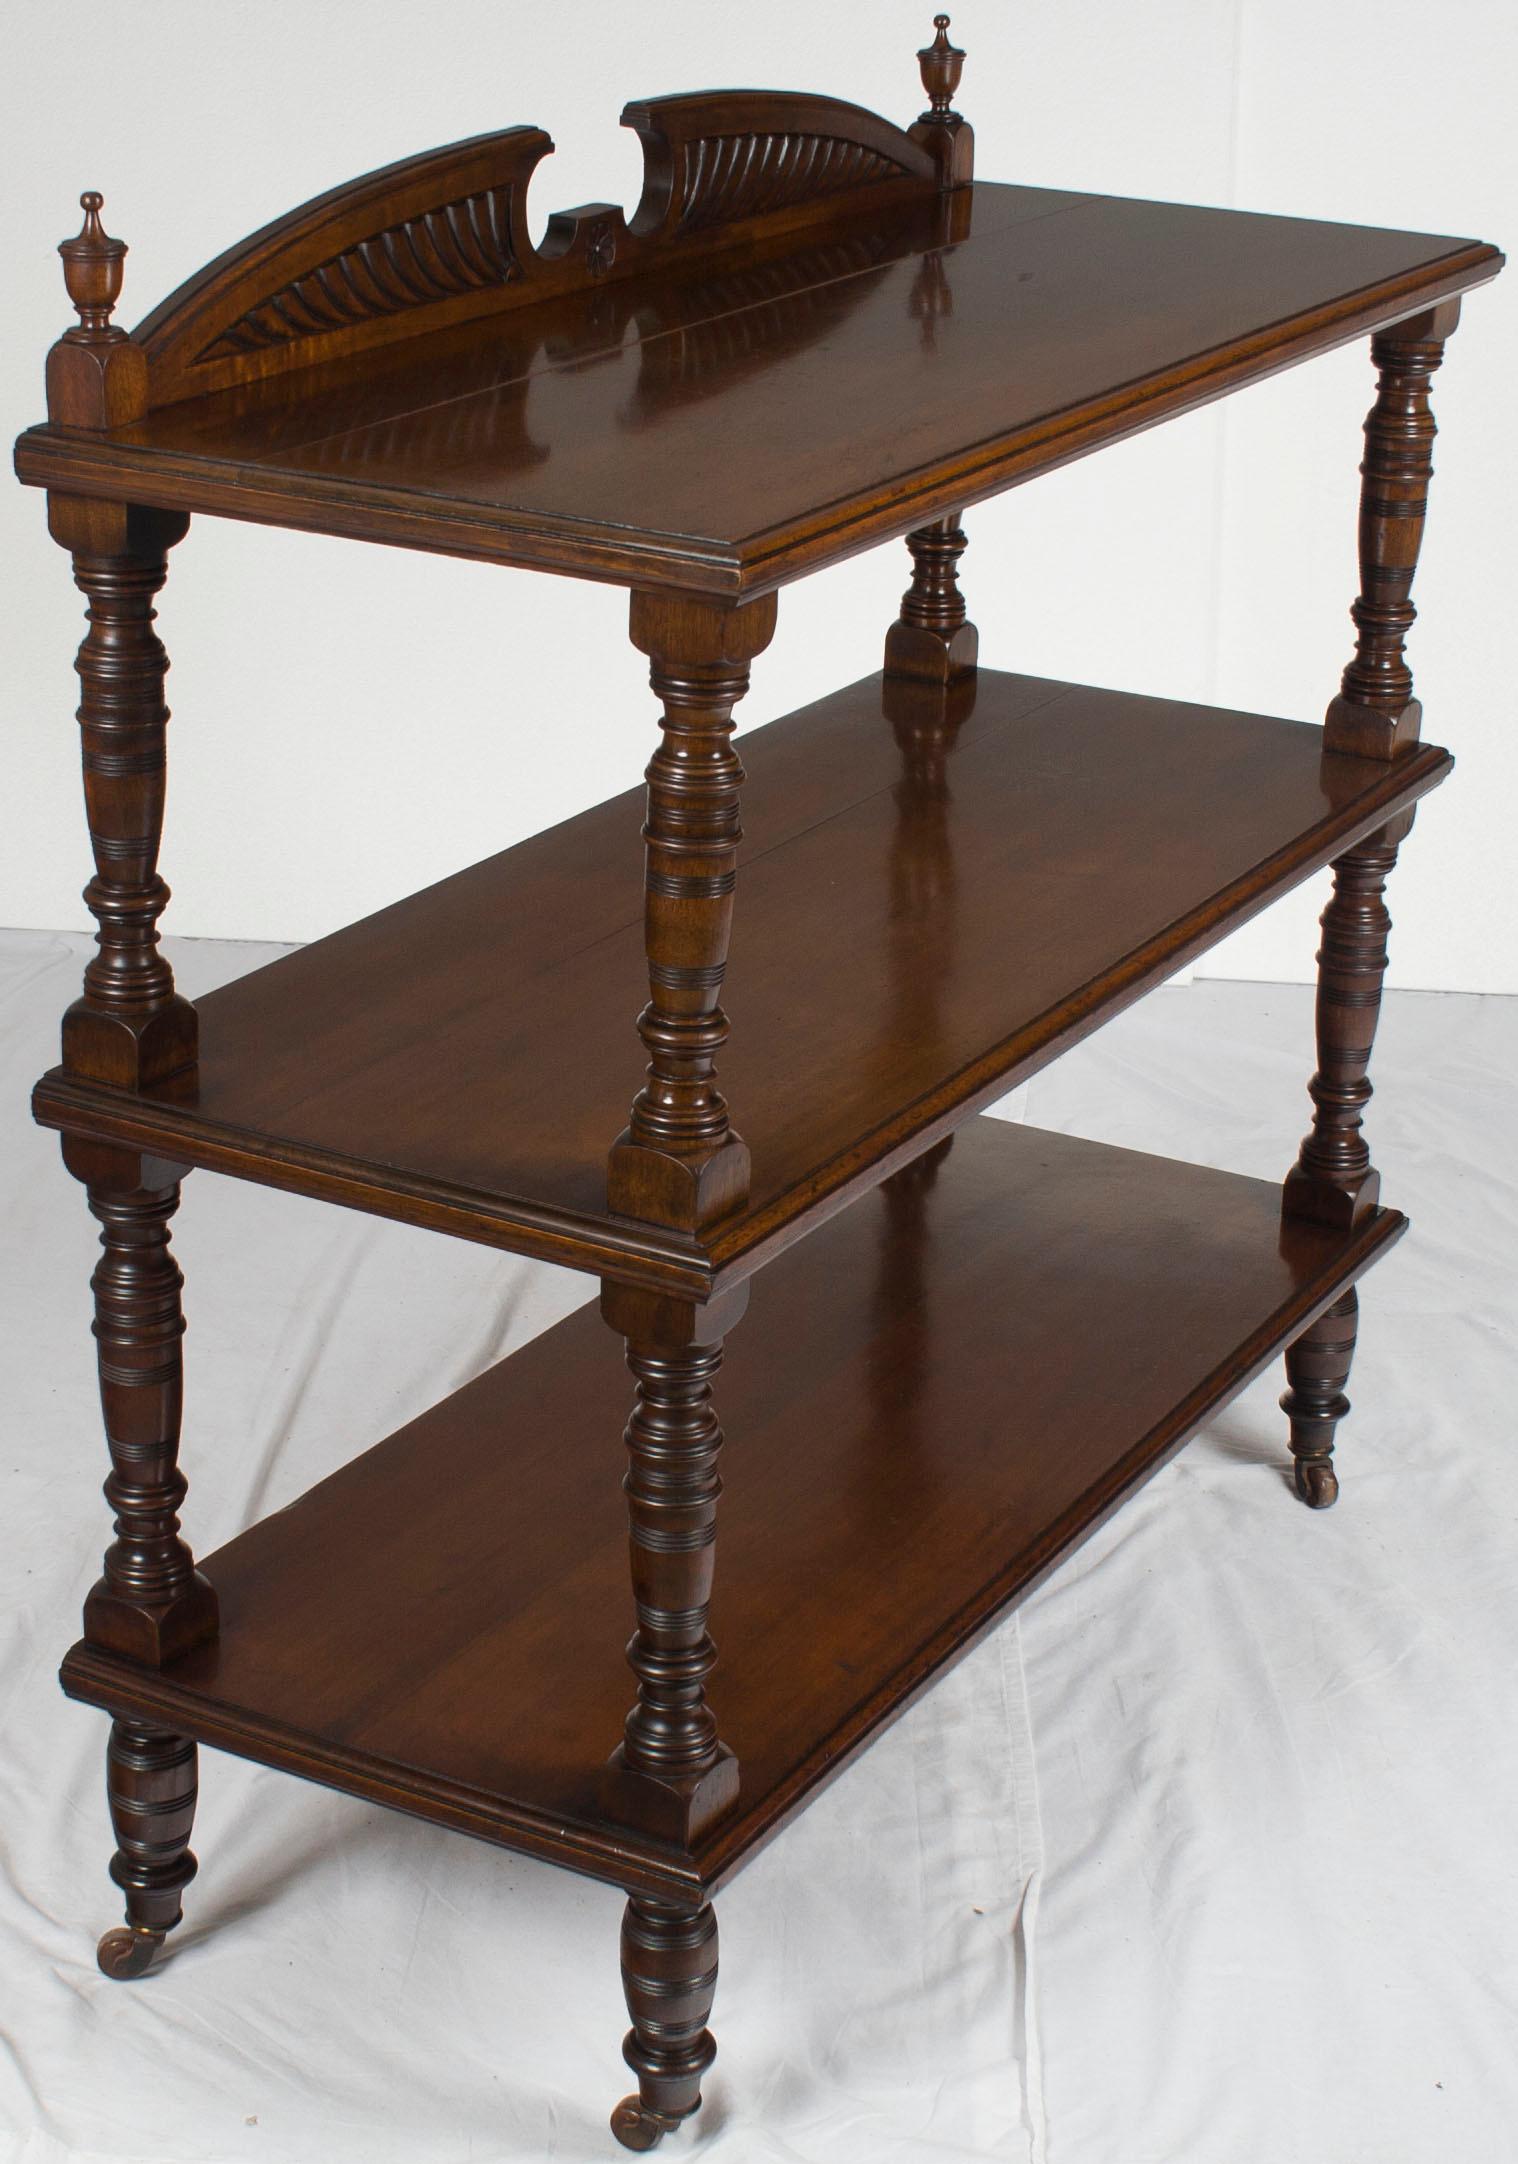 This English mahogany three-tier server was made during the late Victorian period, circa 1900. Also known as a dumb waiter or étagère this piece would traditionally have gone in a dining room and meals would have been served from it. Today we use